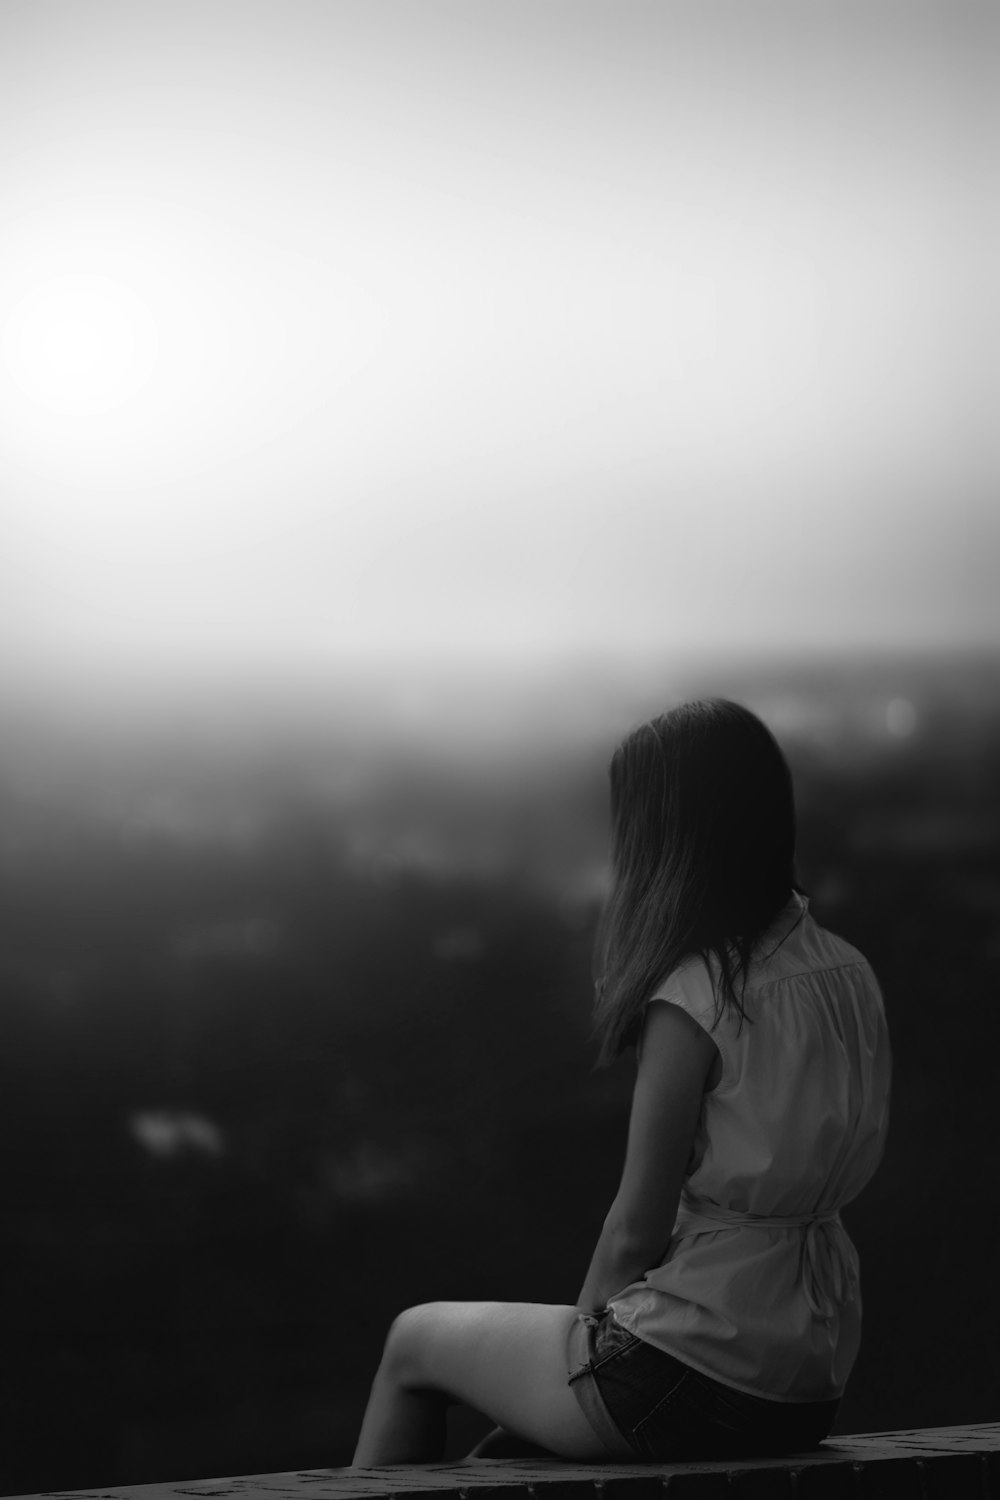 500+ Lonely Girl Pictures | Download Free Images on Unsplash